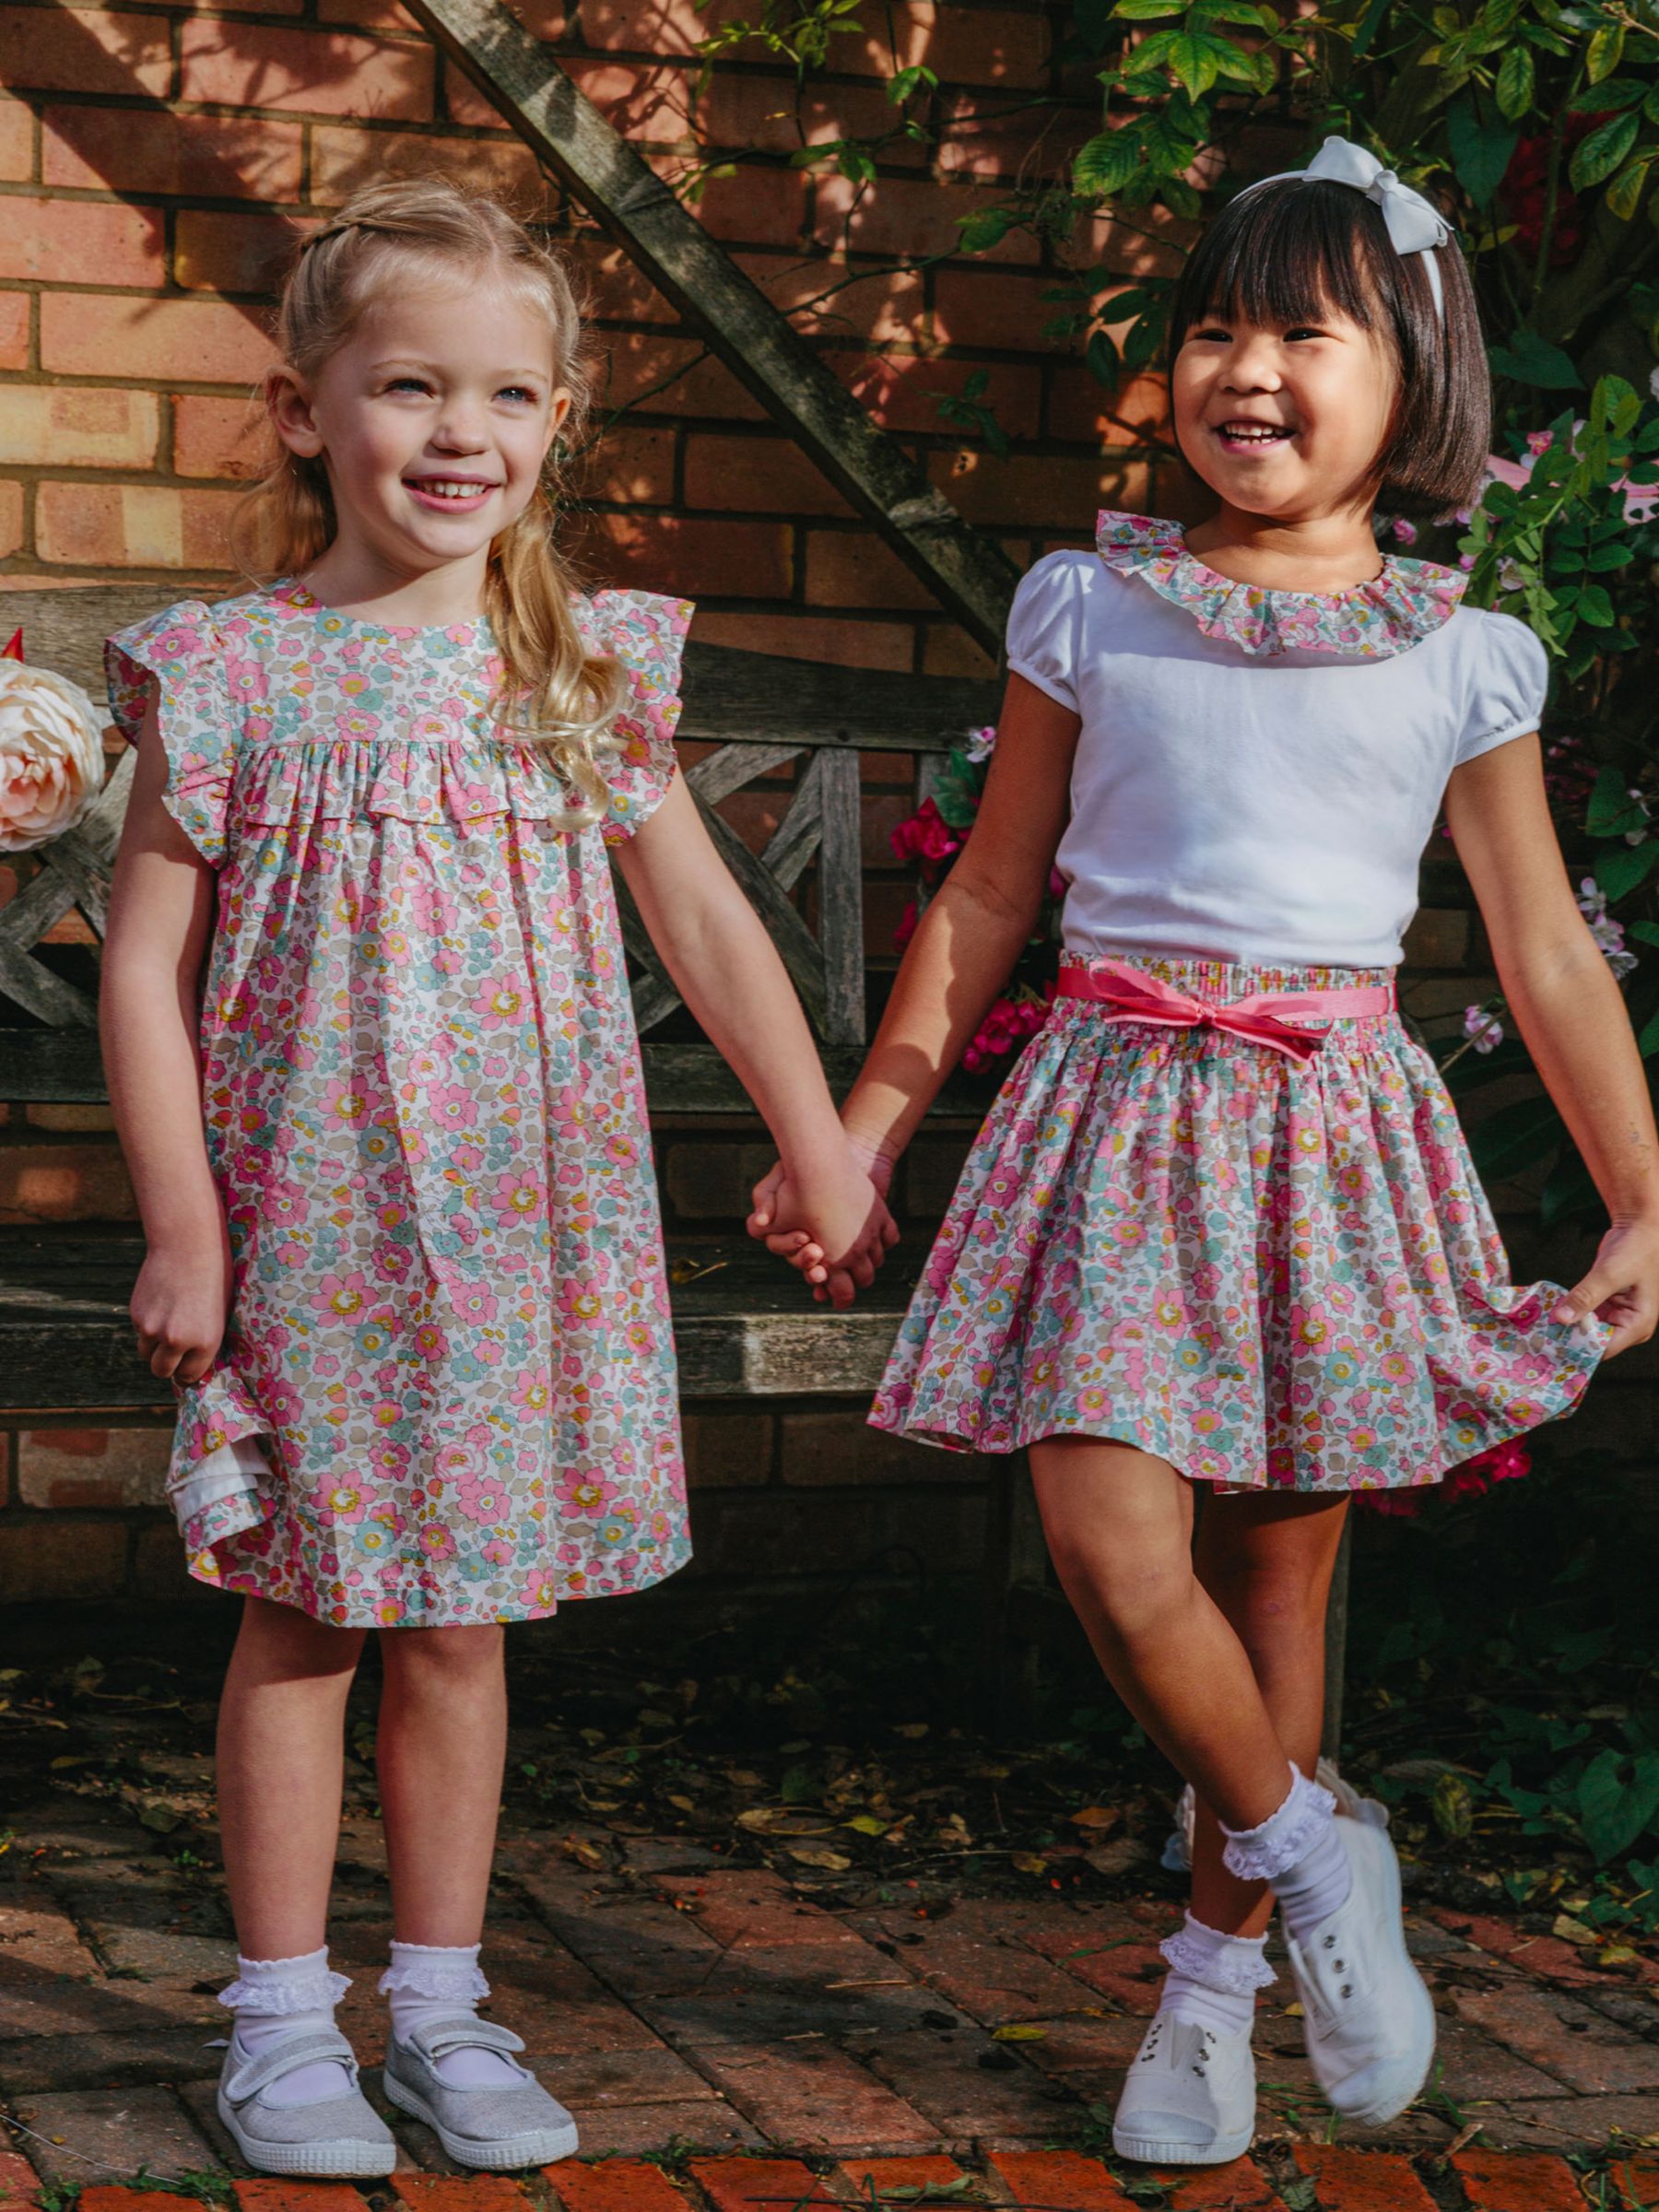 Buy Trotters Kids' Liberty's Betsy Floral Print Ruffle Detail Dress, Coral Online at johnlewis.com